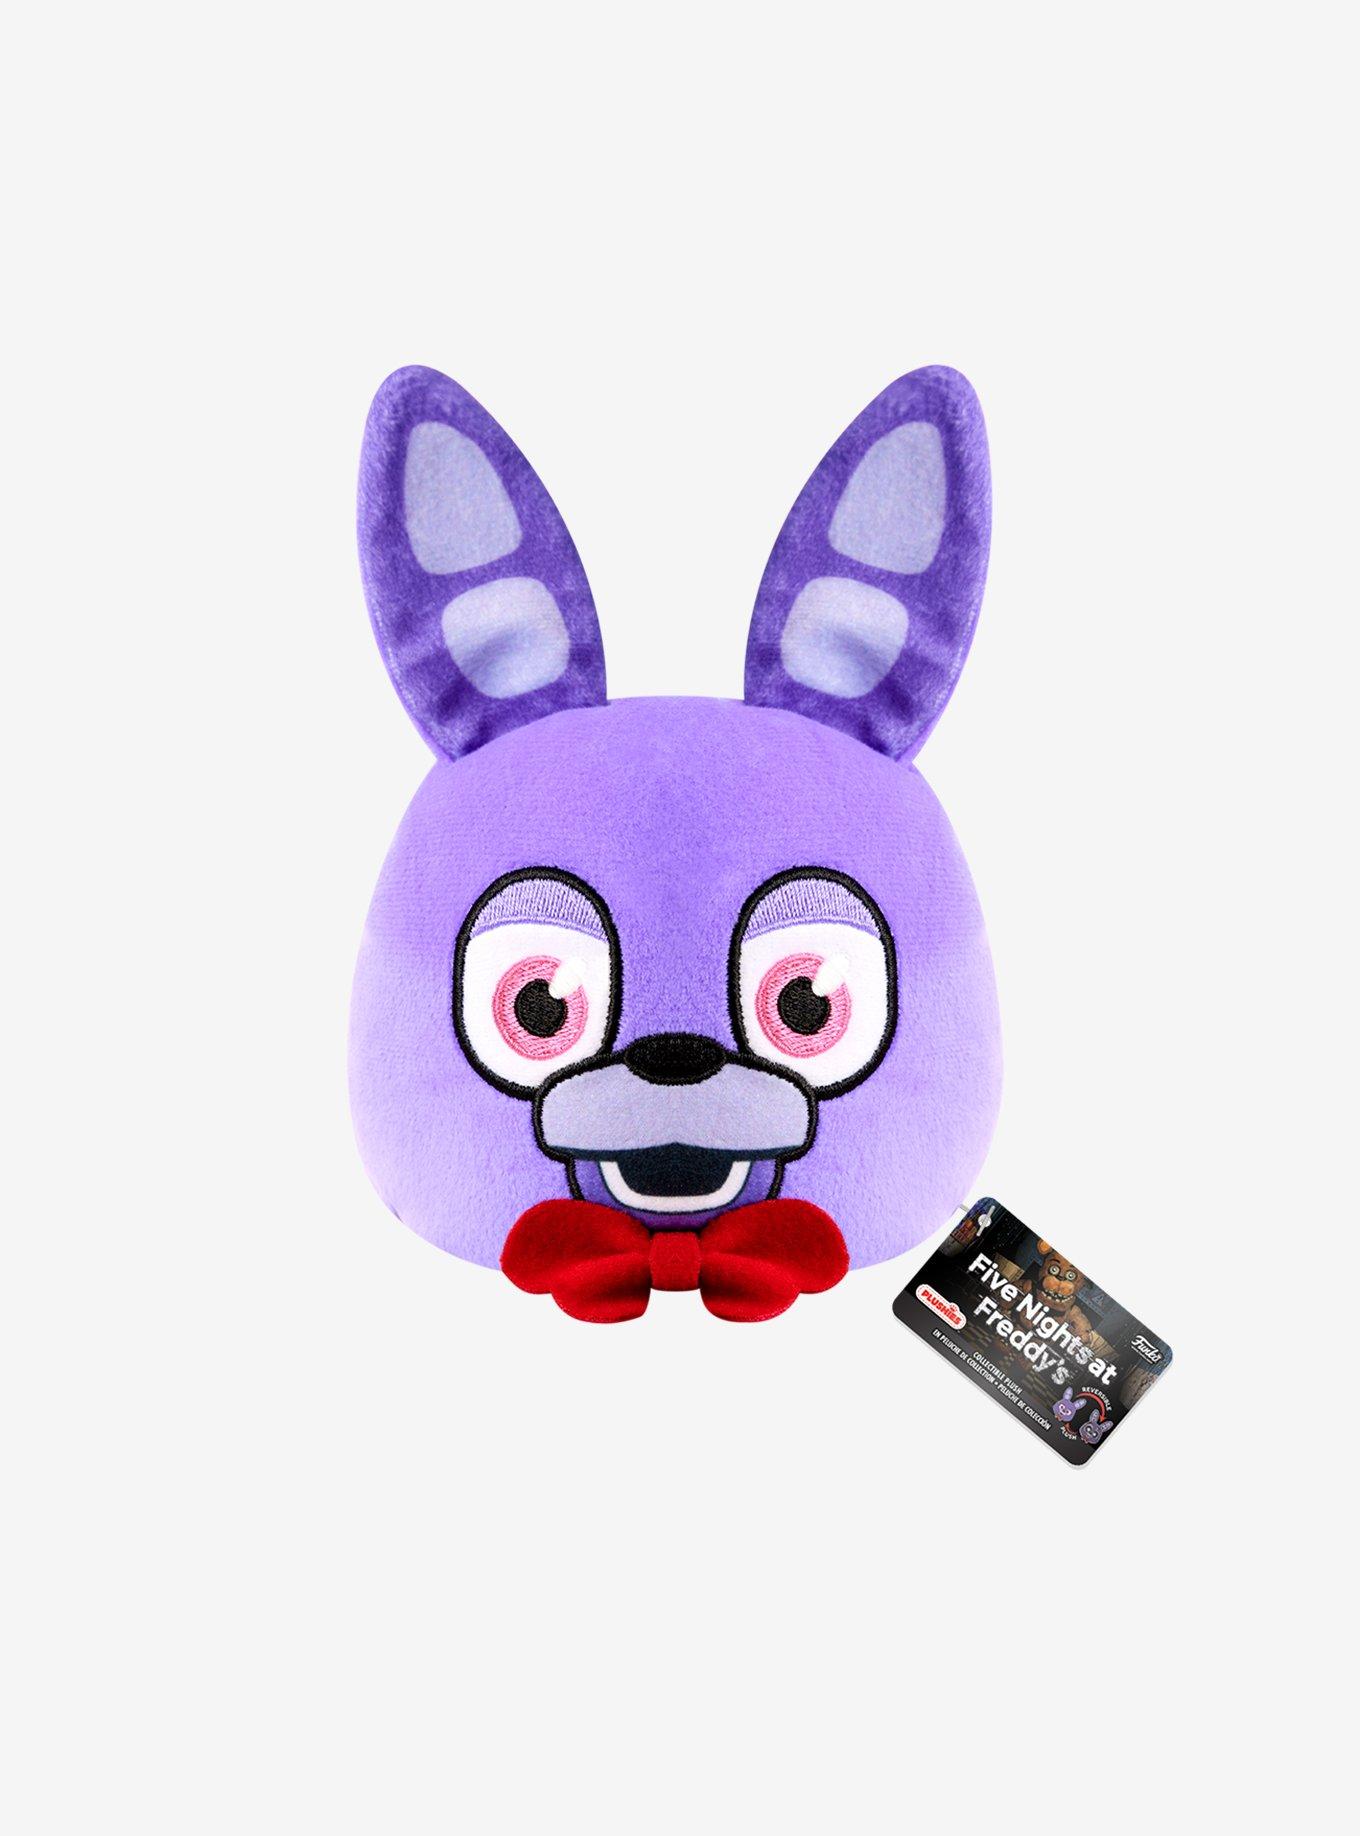 Withered Bonnie Plush